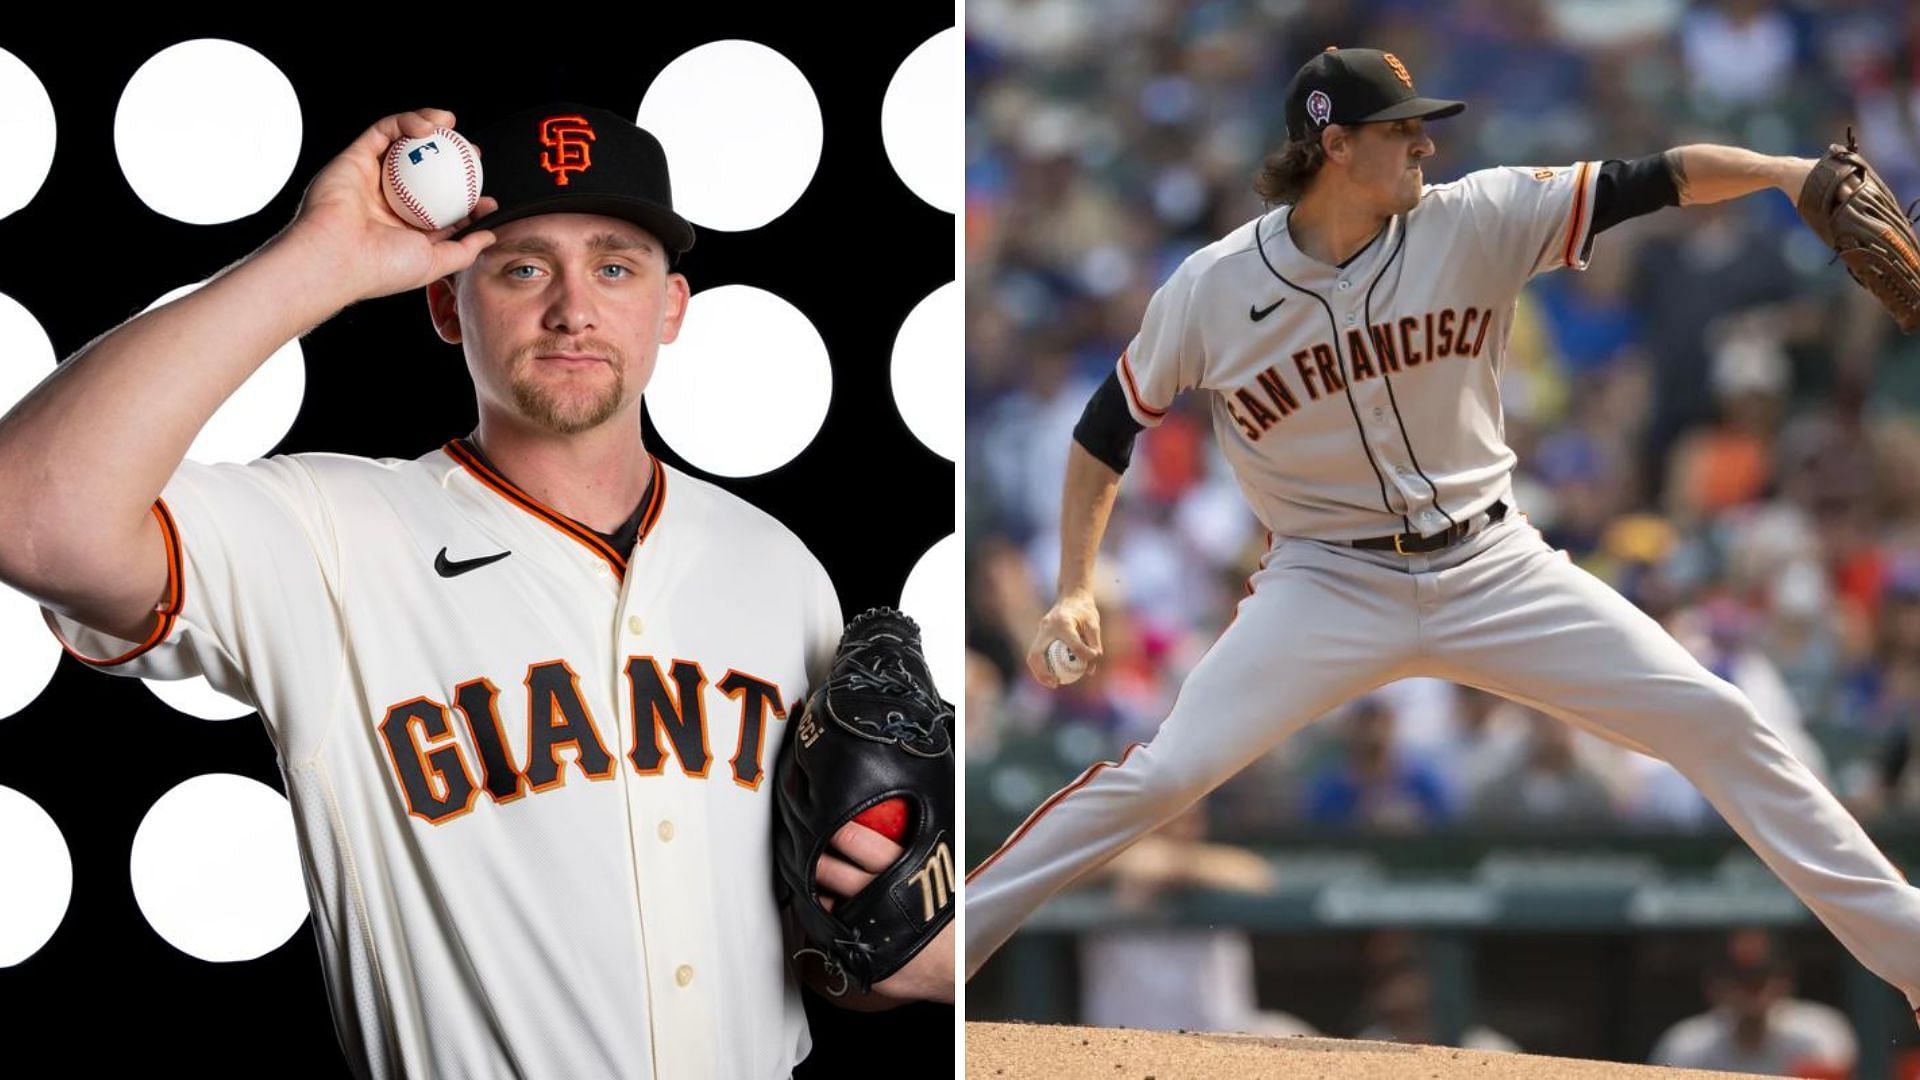 Keaton Winn has been called up by the Giants 